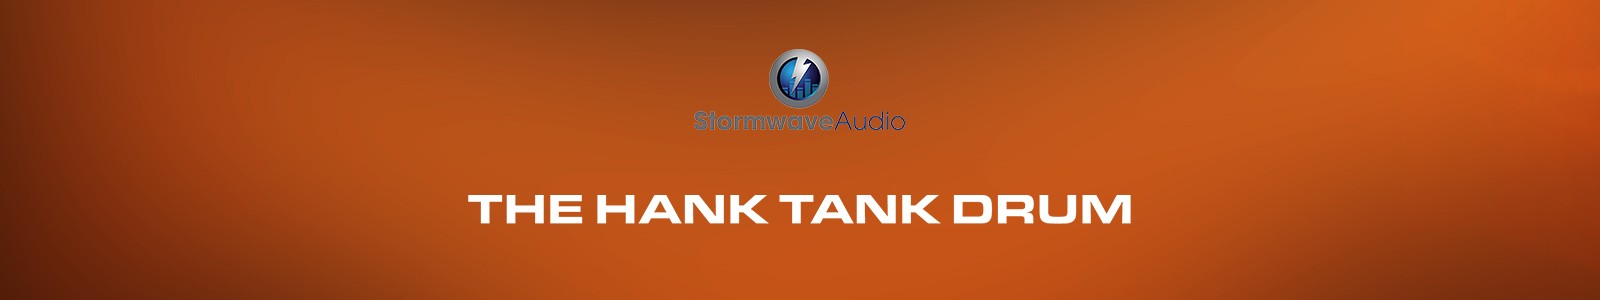 The Hand Tank Drum by Stormwave Audio